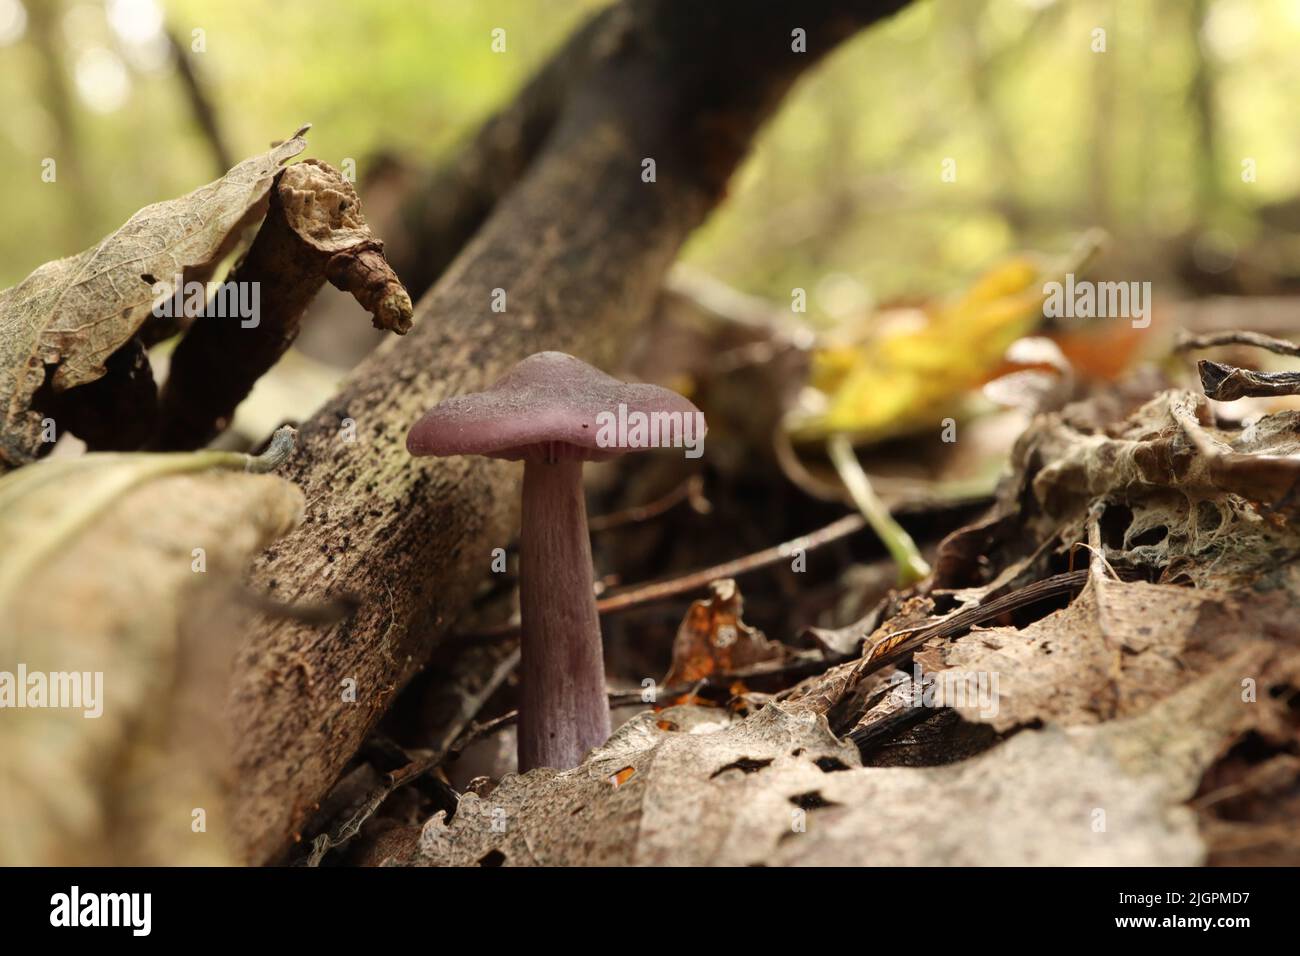 Lepista nuda in the autumn forest Stock Photo